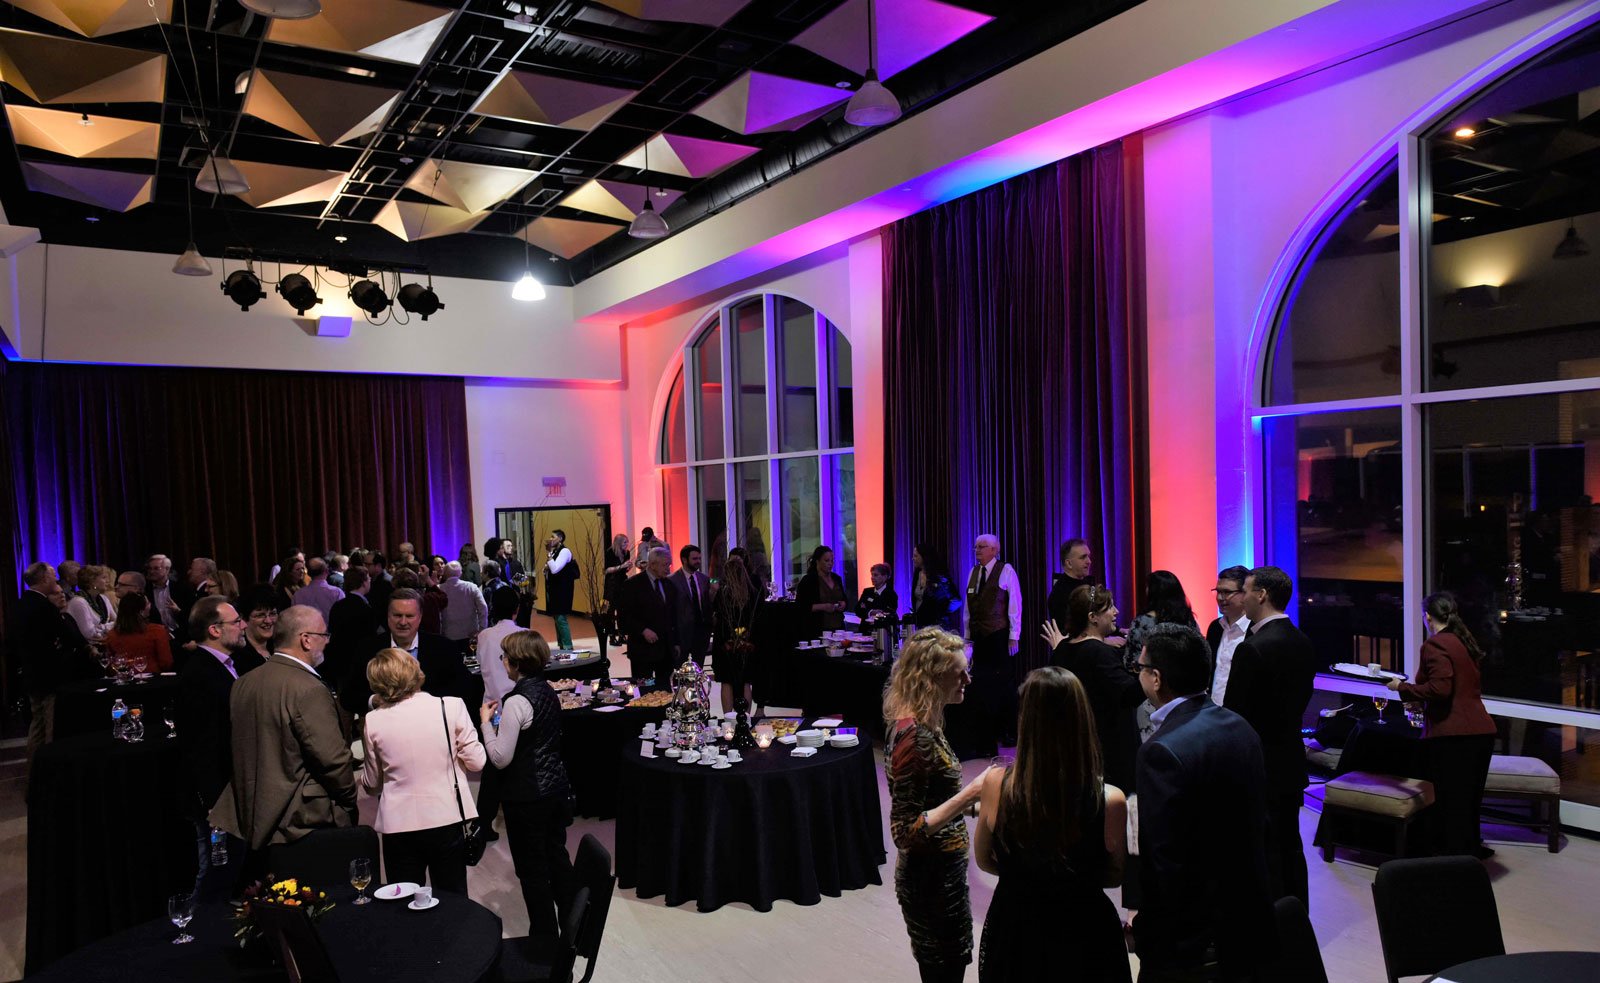 The Studio at the Appell Center during an evening event with guests, food and drink stations and dramatic lighting.